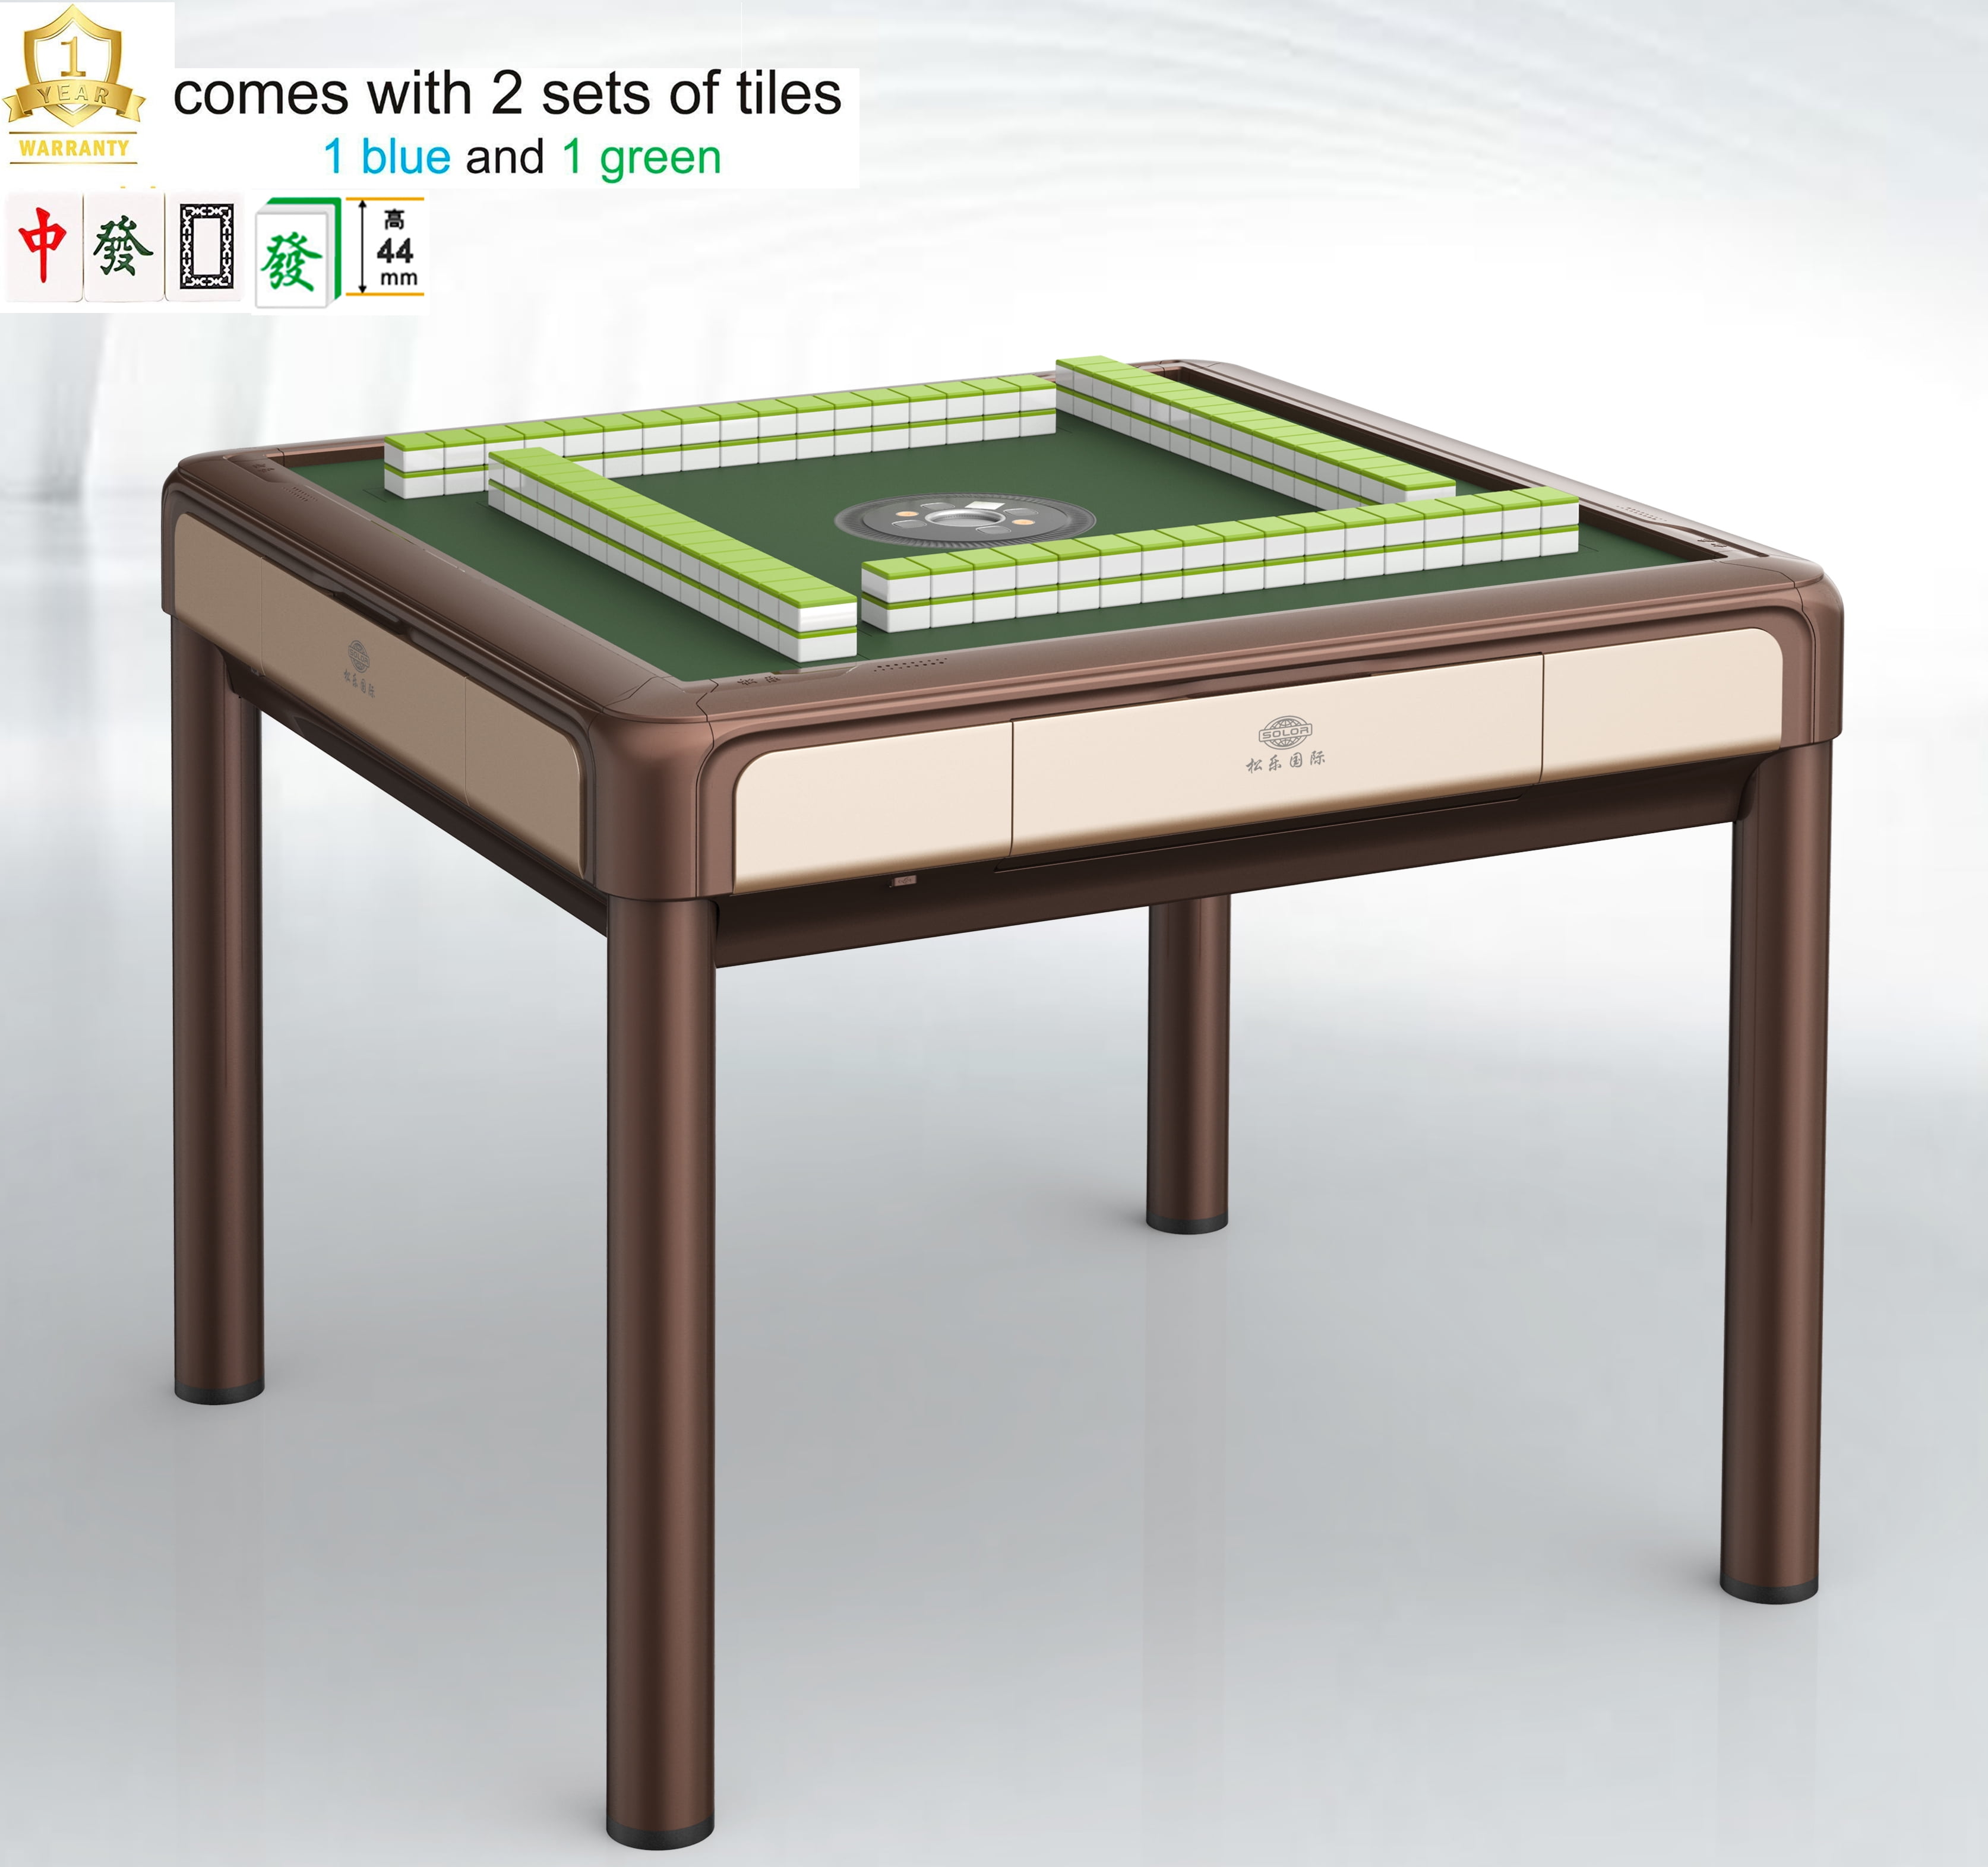 Chinese Style Comes 2 Sets of No Number Tiles Not Fit 166 American Mahjong & Durable Table Cover Phone Charger Dining Table Drawers 144Tiles 44mm无数字版 Ultra Thin Automatic Mahjong Table with 4 Legs